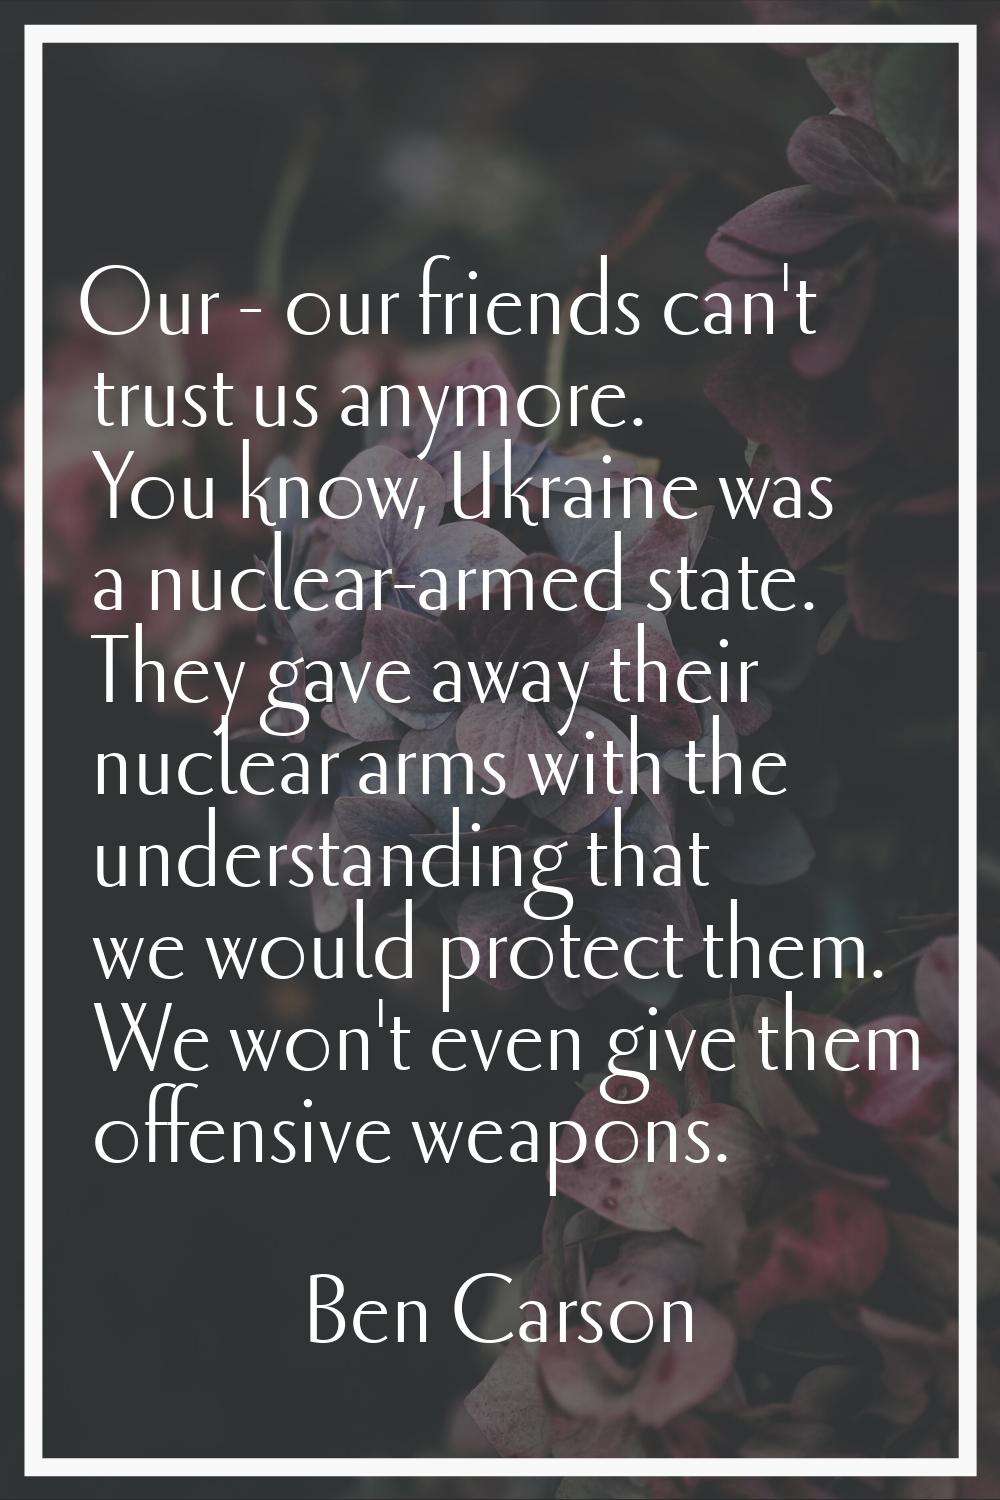 Our - our friends can't trust us anymore. You know, Ukraine was a nuclear-armed state. They gave aw